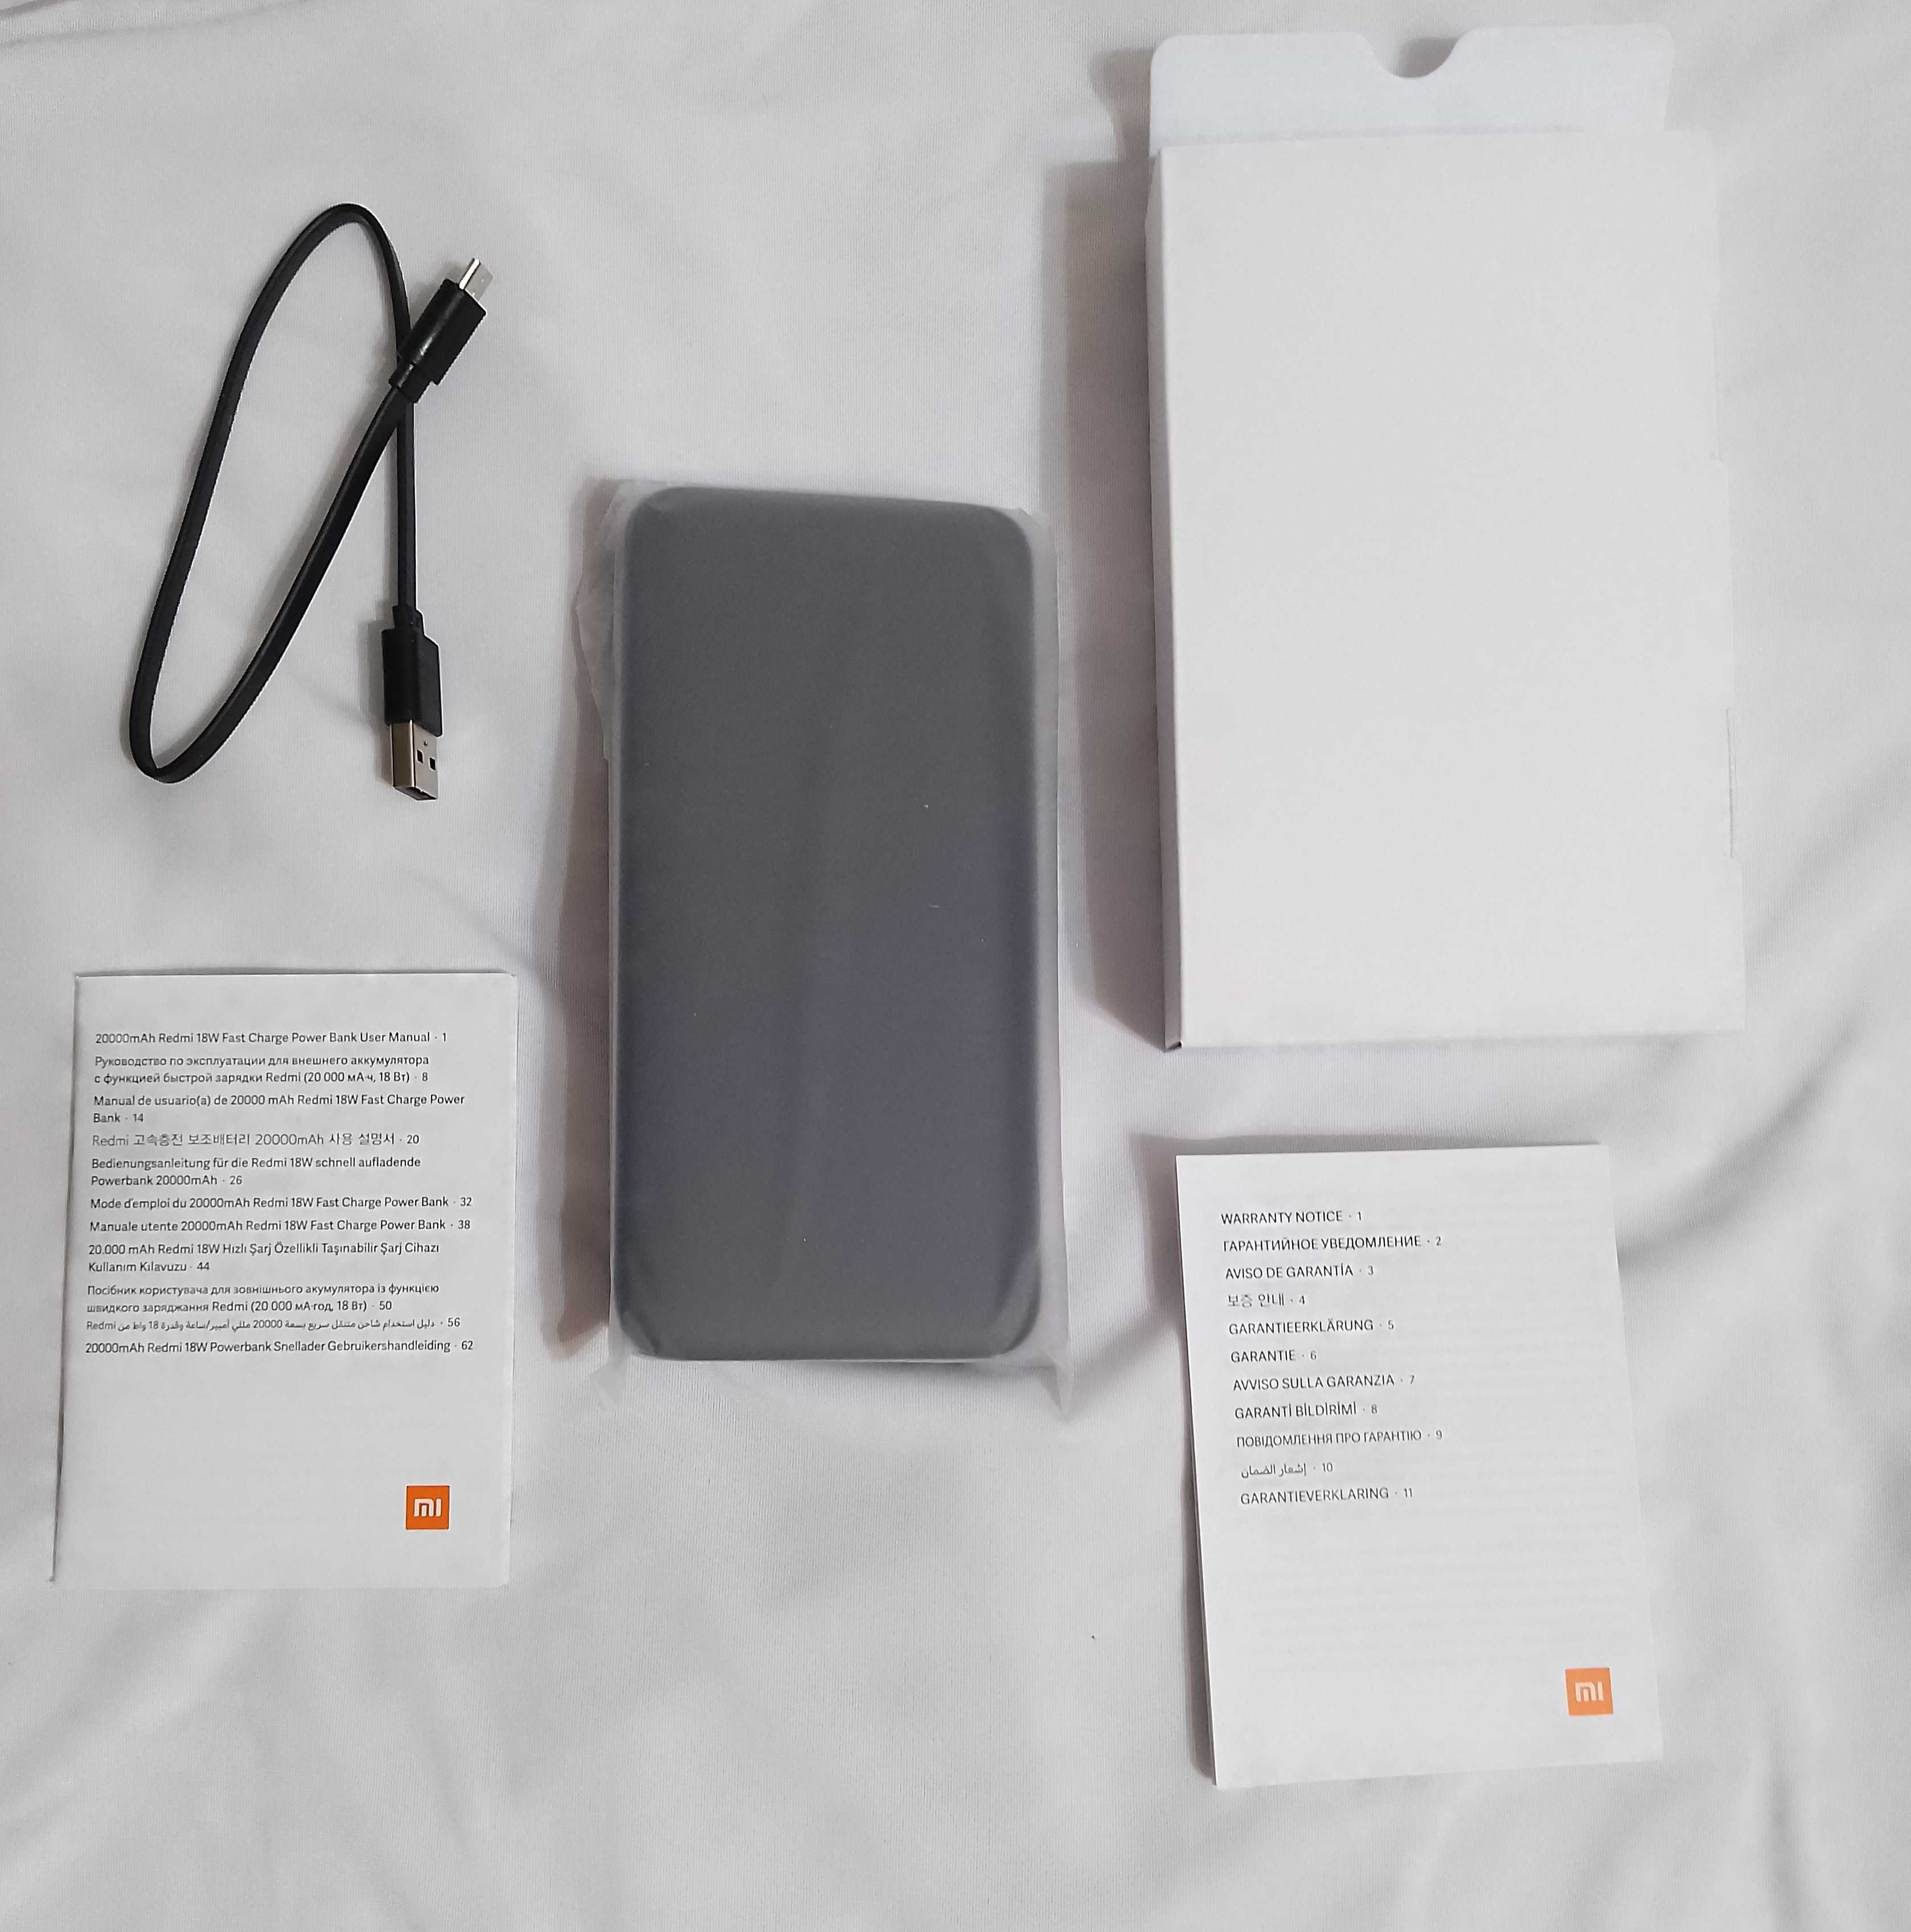 Fast Charge Power Bank Redmi 18W 20000mAh